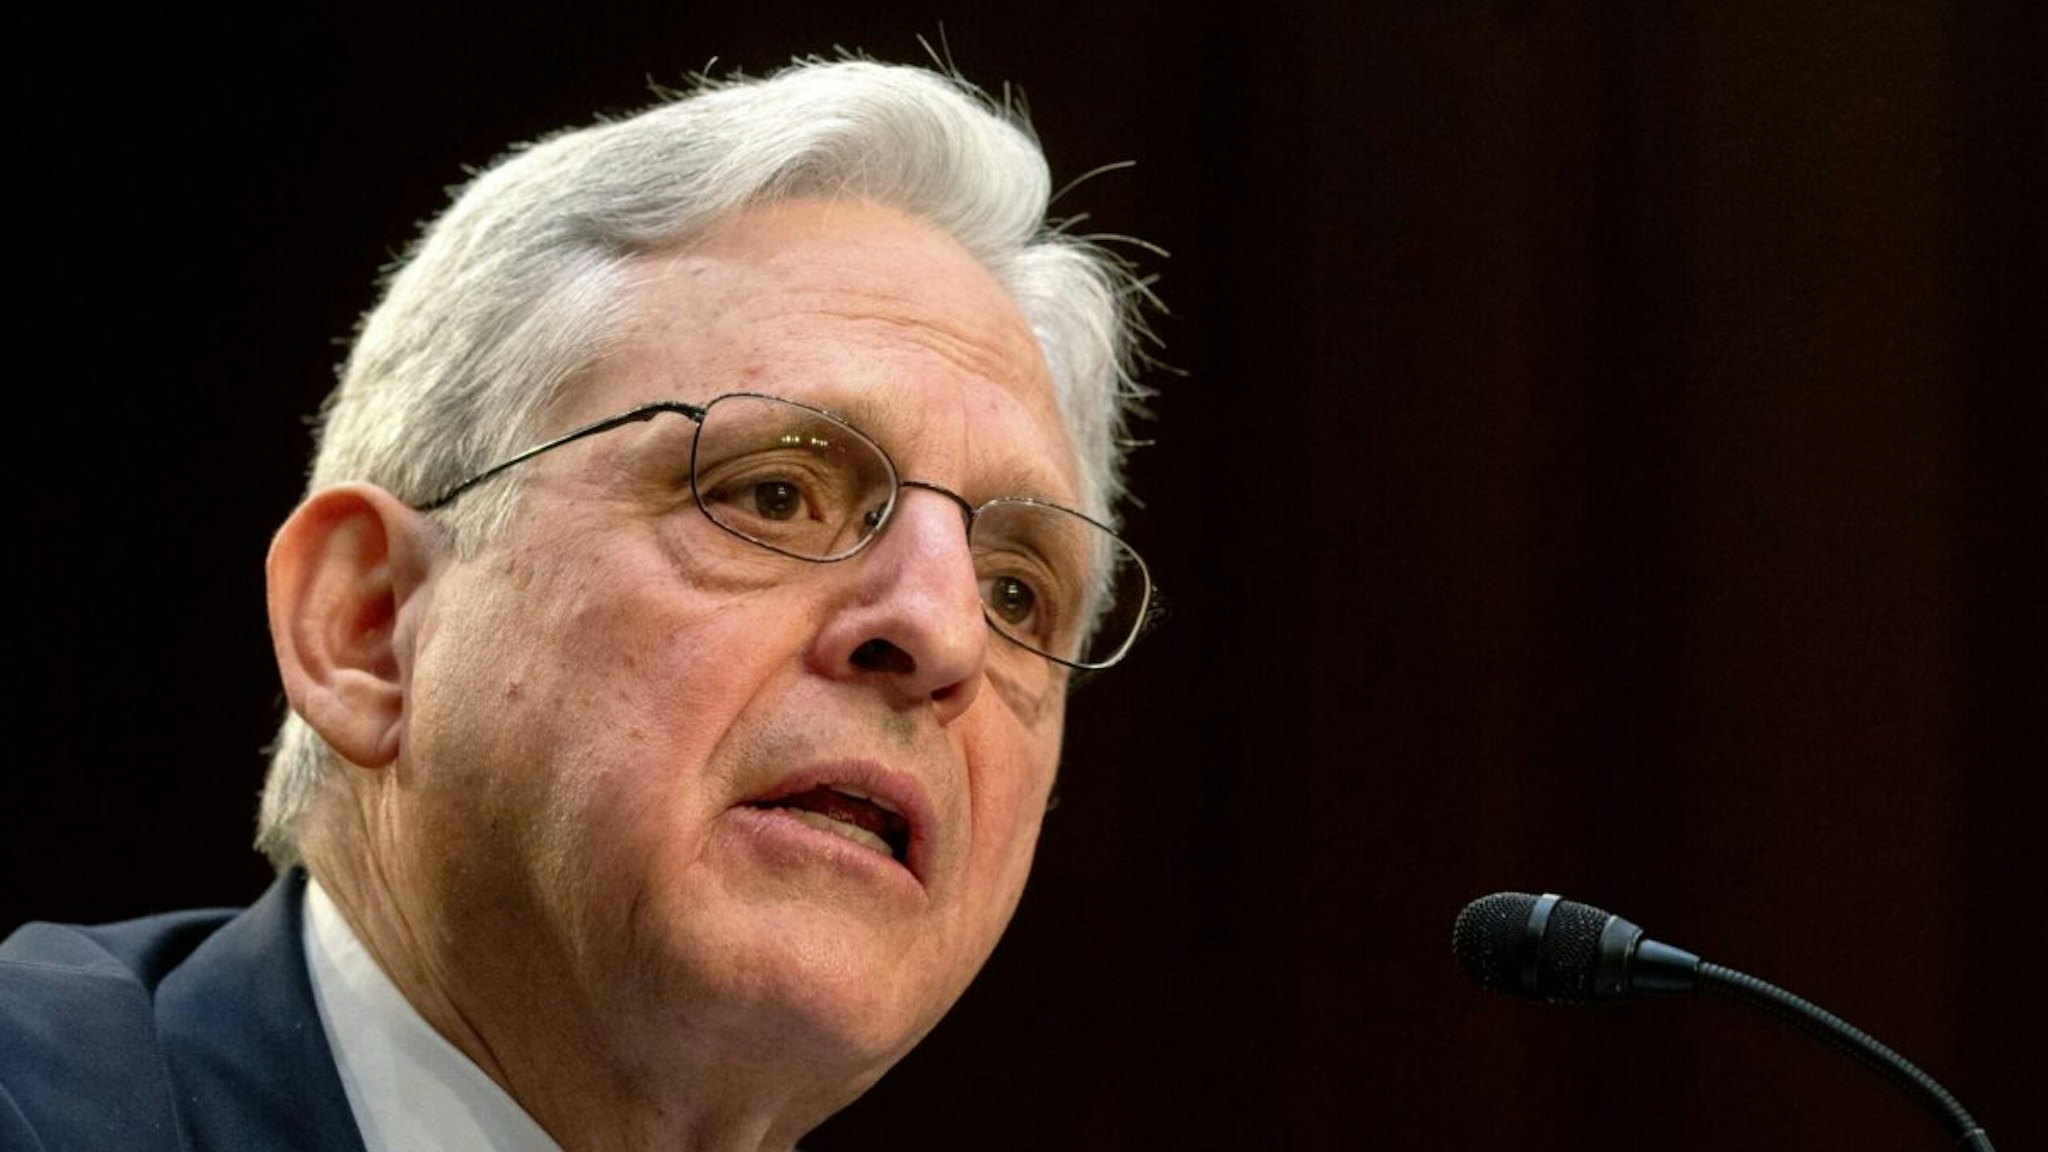 US Attorney General Merrick Garland testifies during a US Senate Judiciary Committee oversight hearing to examine the Justice Department on Capitol Hill in Washington, DC, on March 1, 2023.